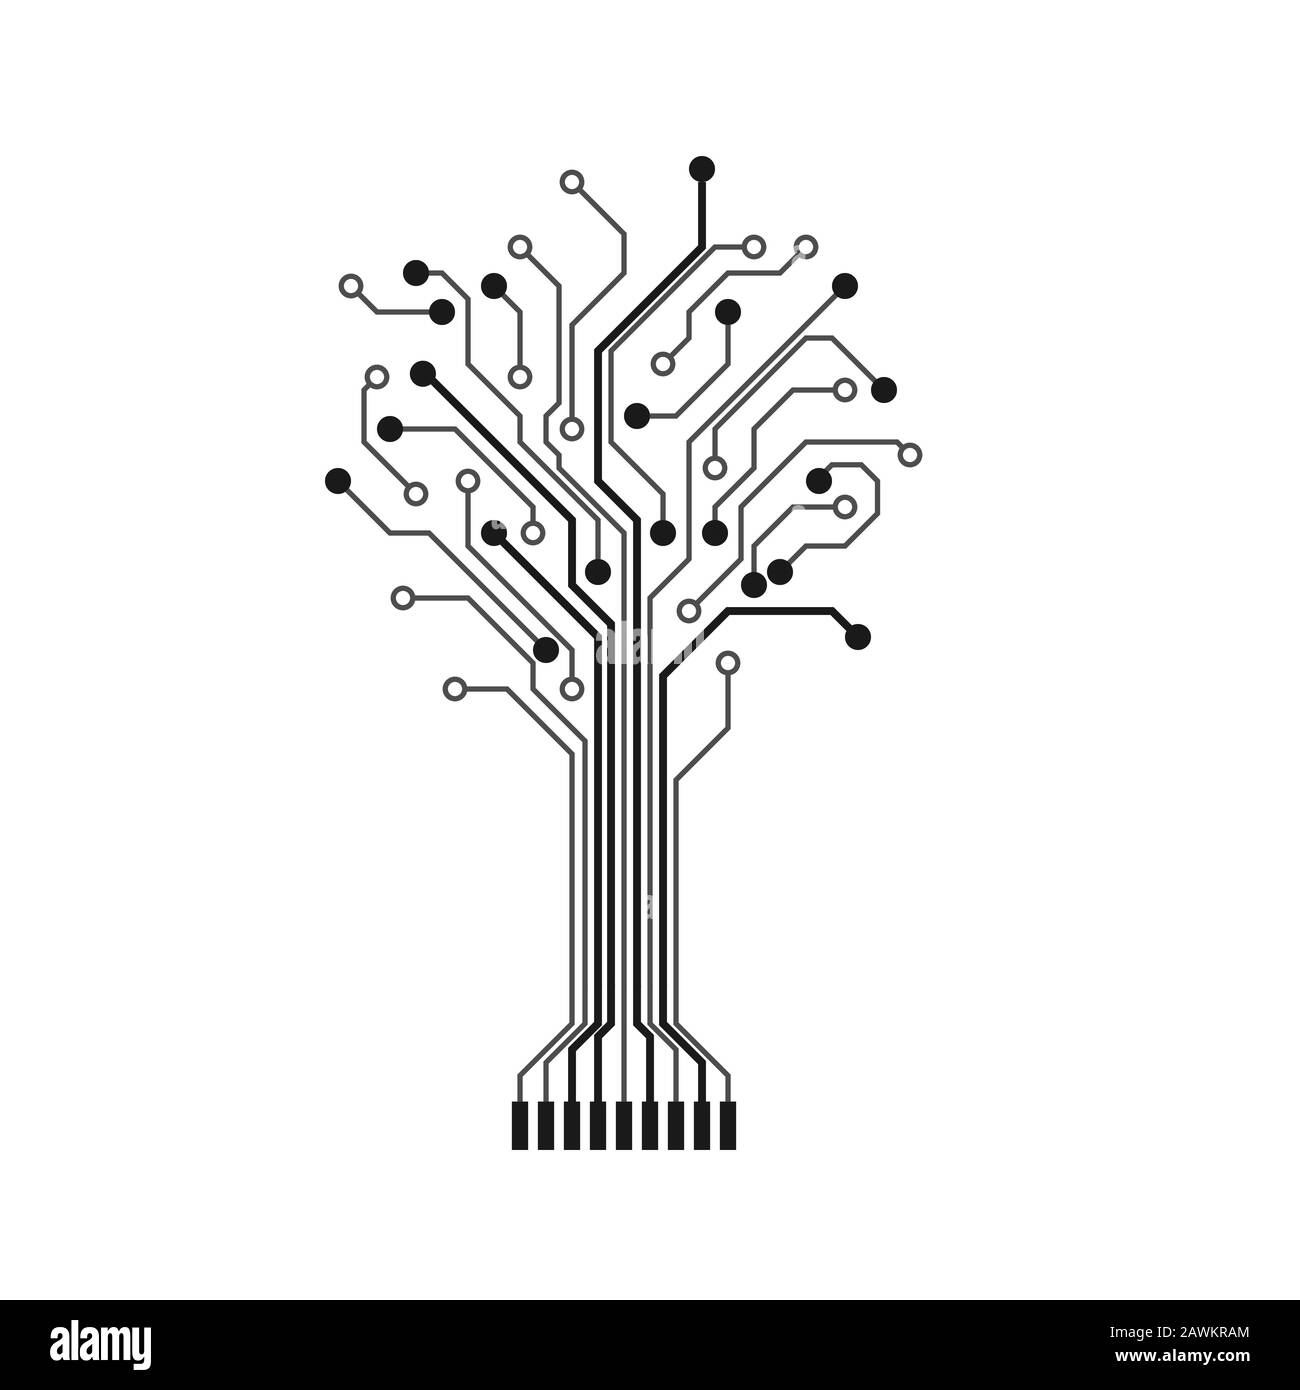 Circuit tree silhouette. Technology design element. Computer engineering hardware system. Vector Stock Vector